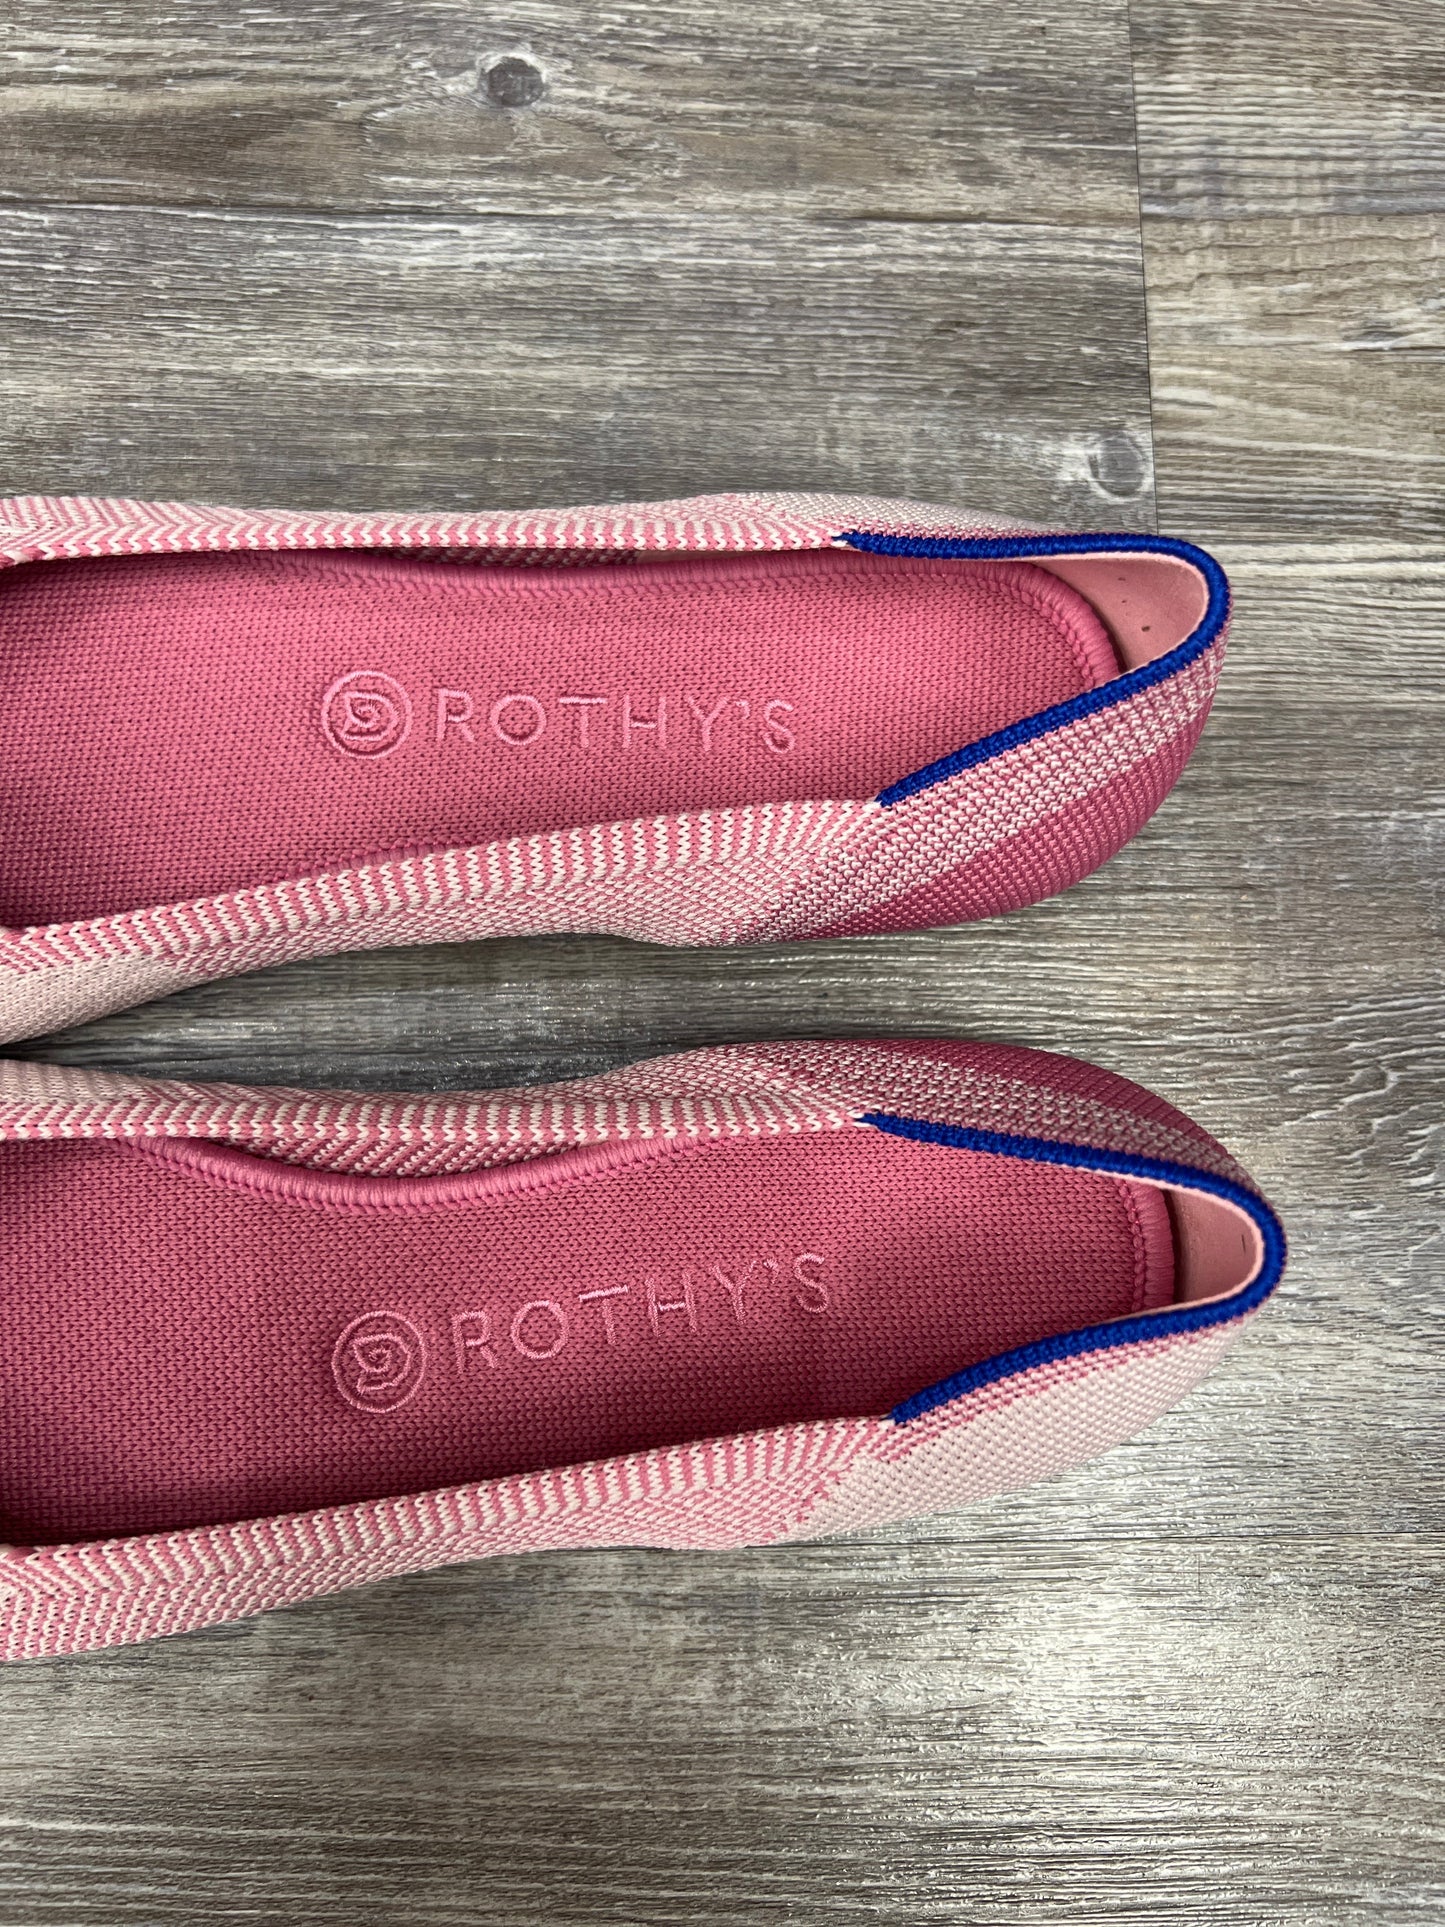 Pink Shoes Flats Rothys, Size 10.5